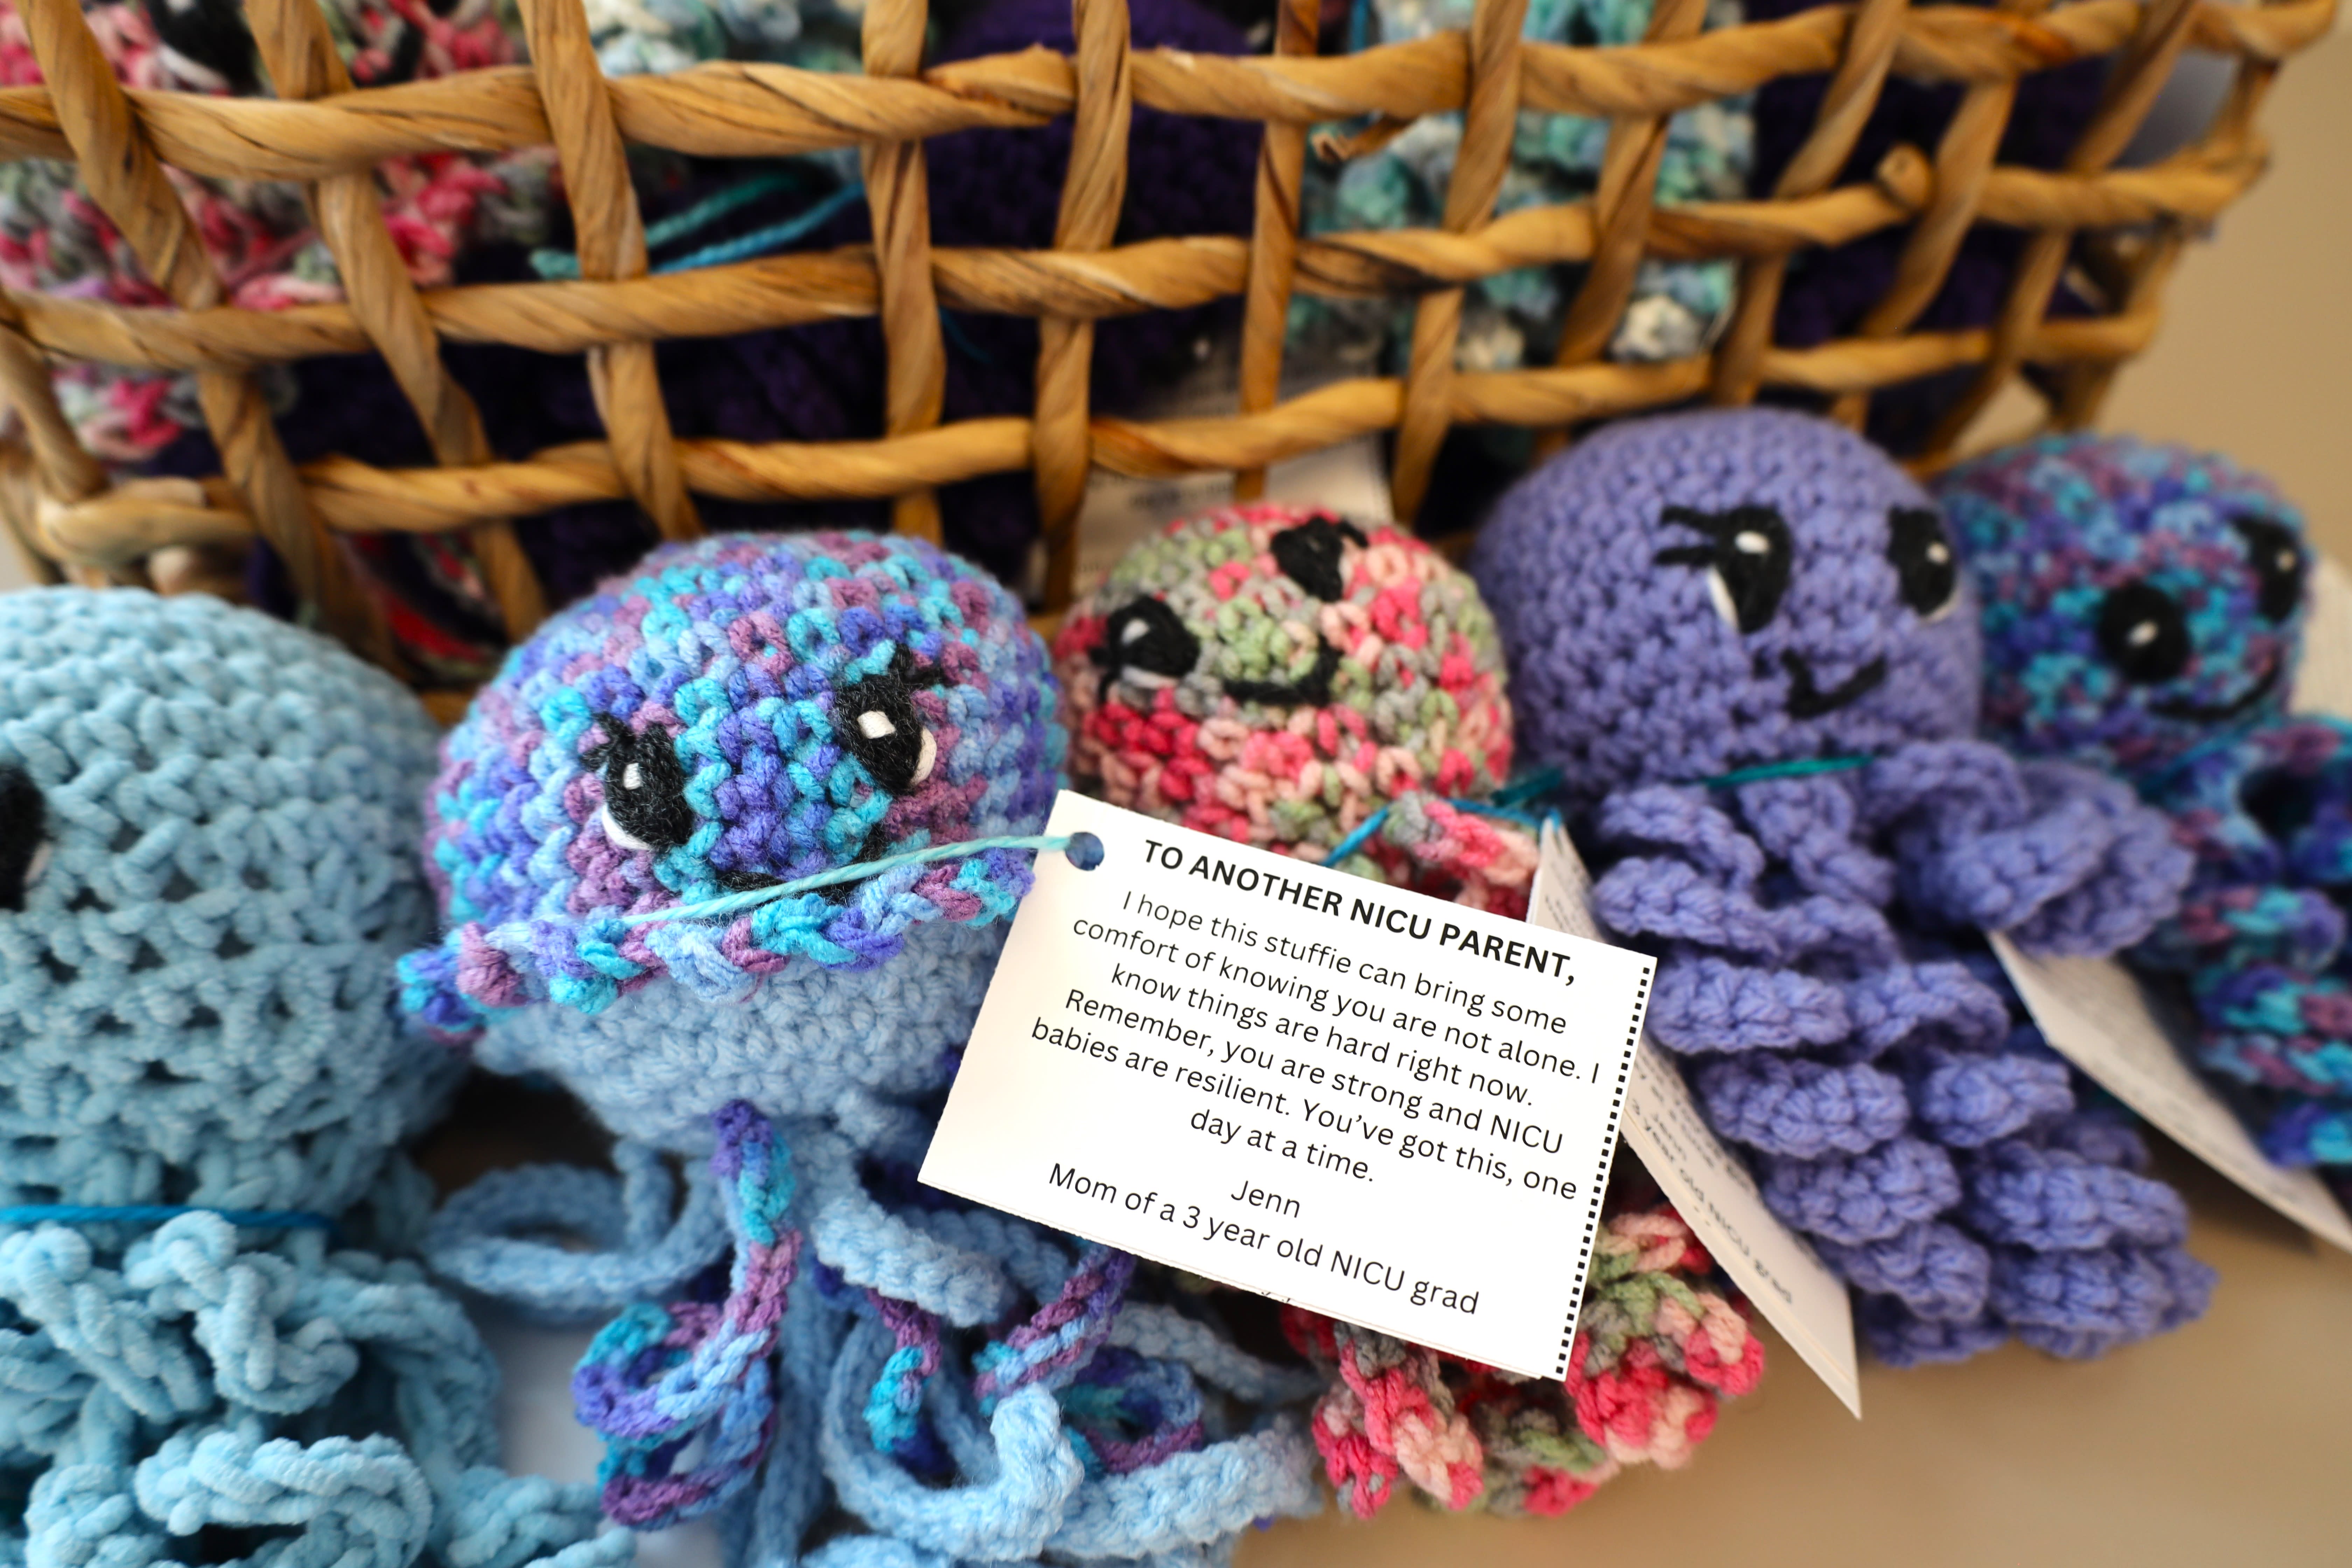 The octopus toys Jenn Marinelli crocheted were complete with attached messages of hope and solidarity to fellow NICU parents.